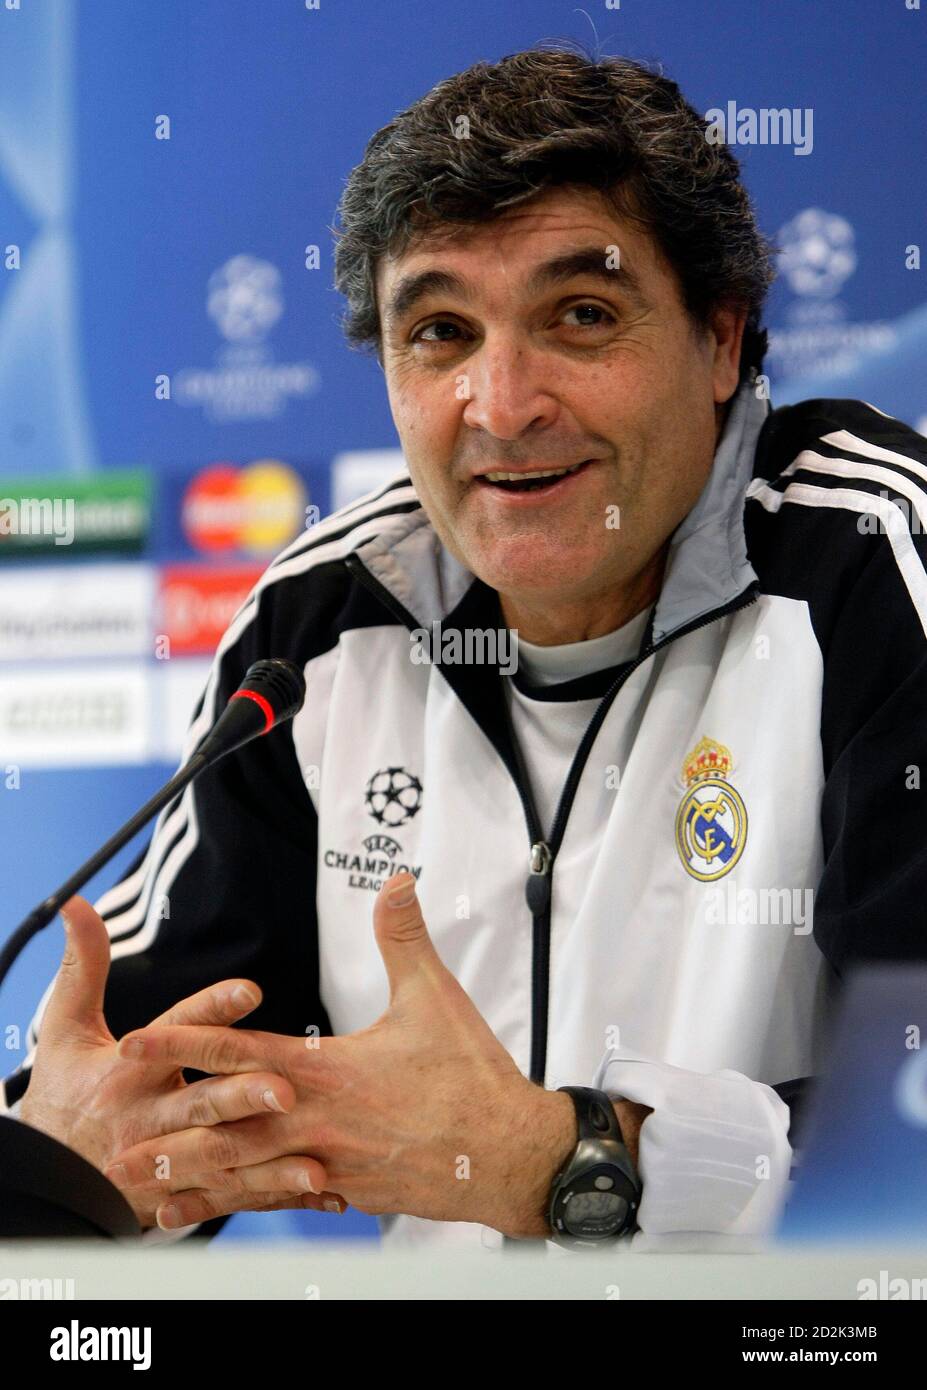 Real Madrid new coach Juande Ramos answers a question during a news  conference ahead of their Champions League match against Zenit Saint  Petersburg in Madrid December 9, 2008. Real Madrid appointed their